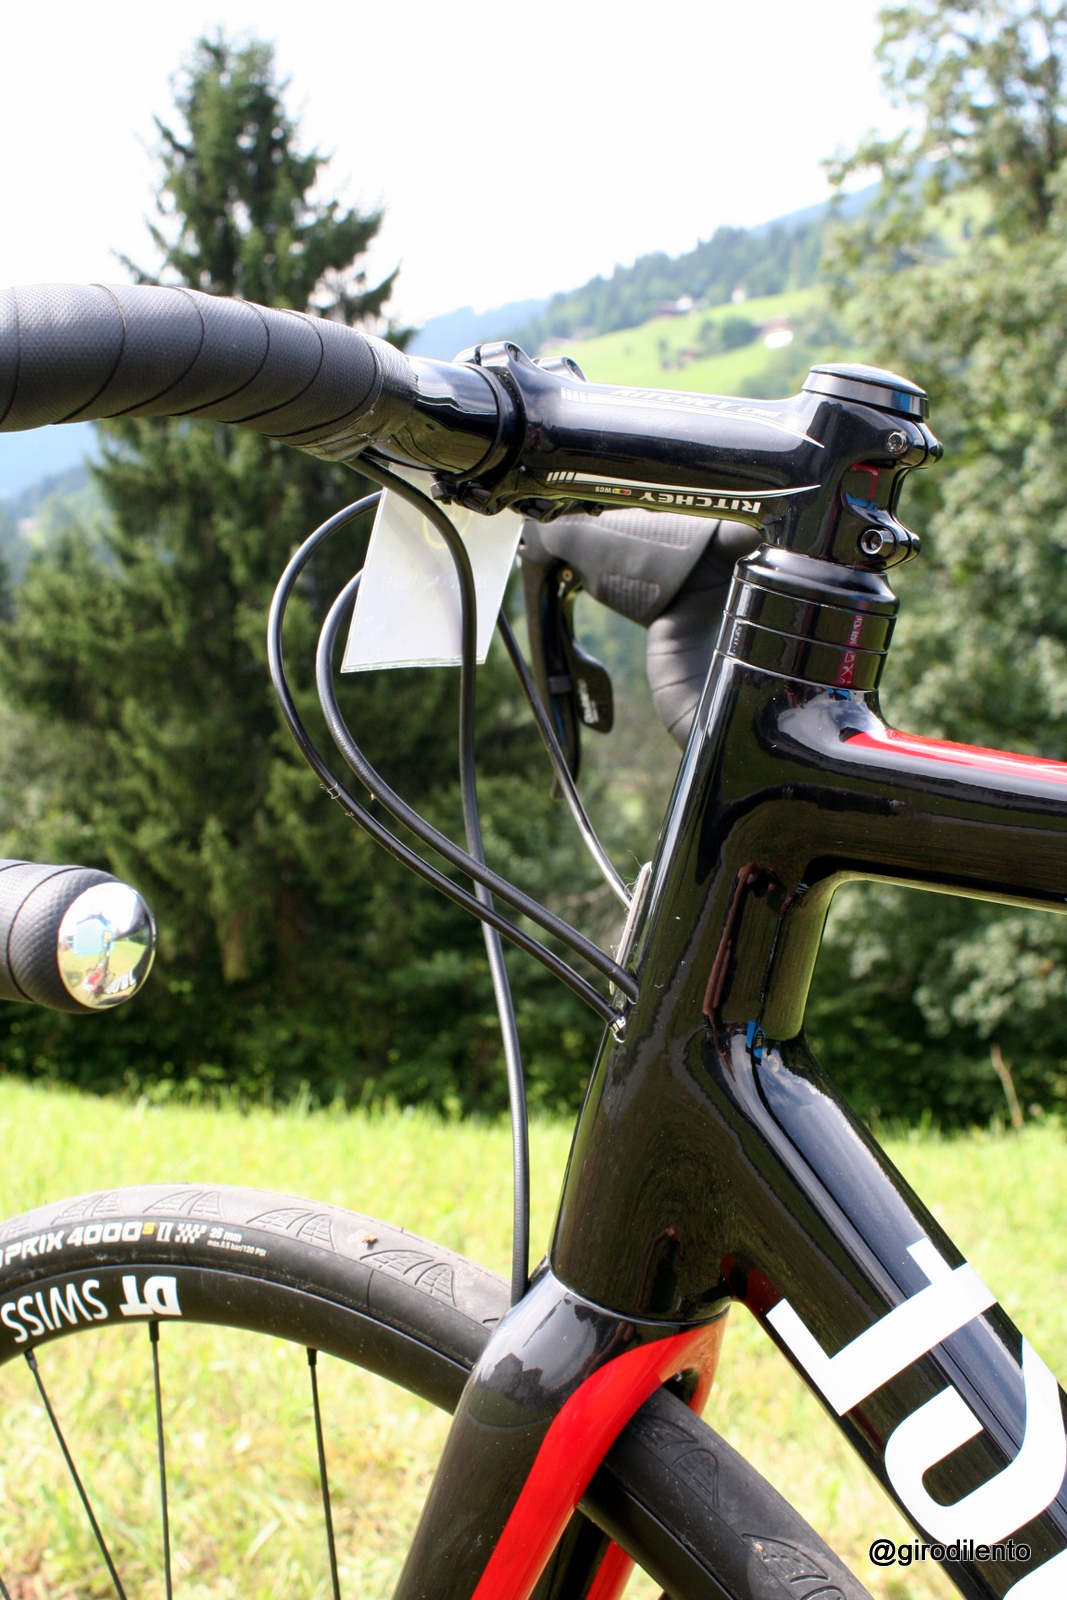 Xeon DX with "expandable" head tube